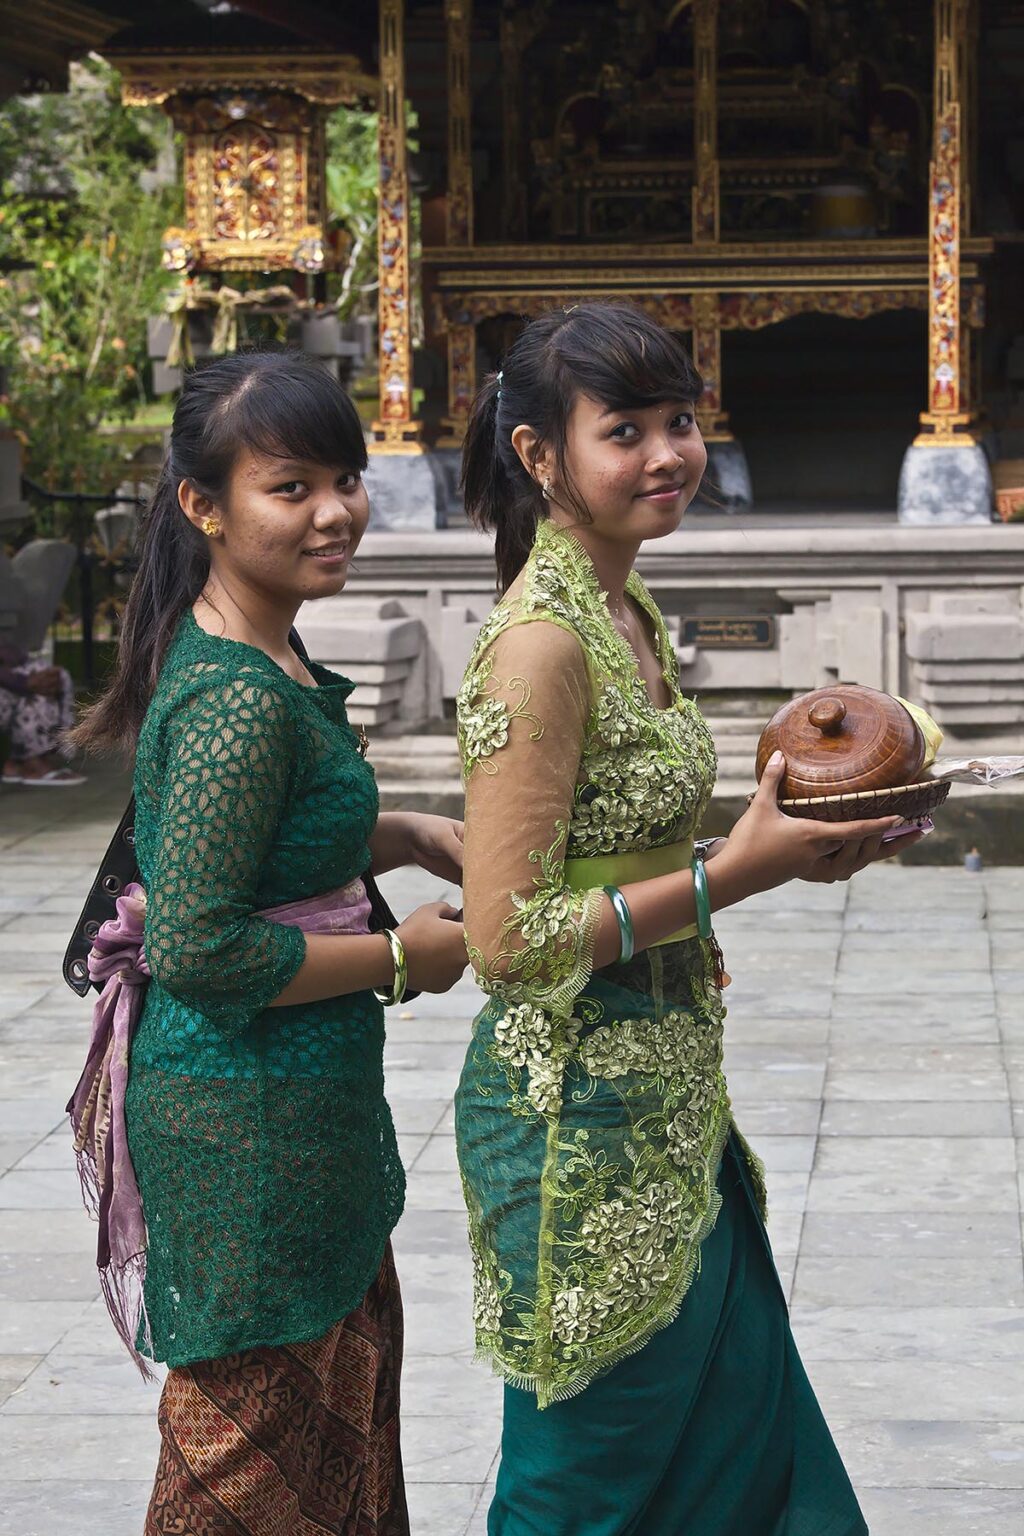 Women bring offering to the PURA TIRTA EMPUL TEMPLE COMPLEX during the GALUNGAN FESTIVAL -  TAMPAKSIRING, BALI, INDONESIA